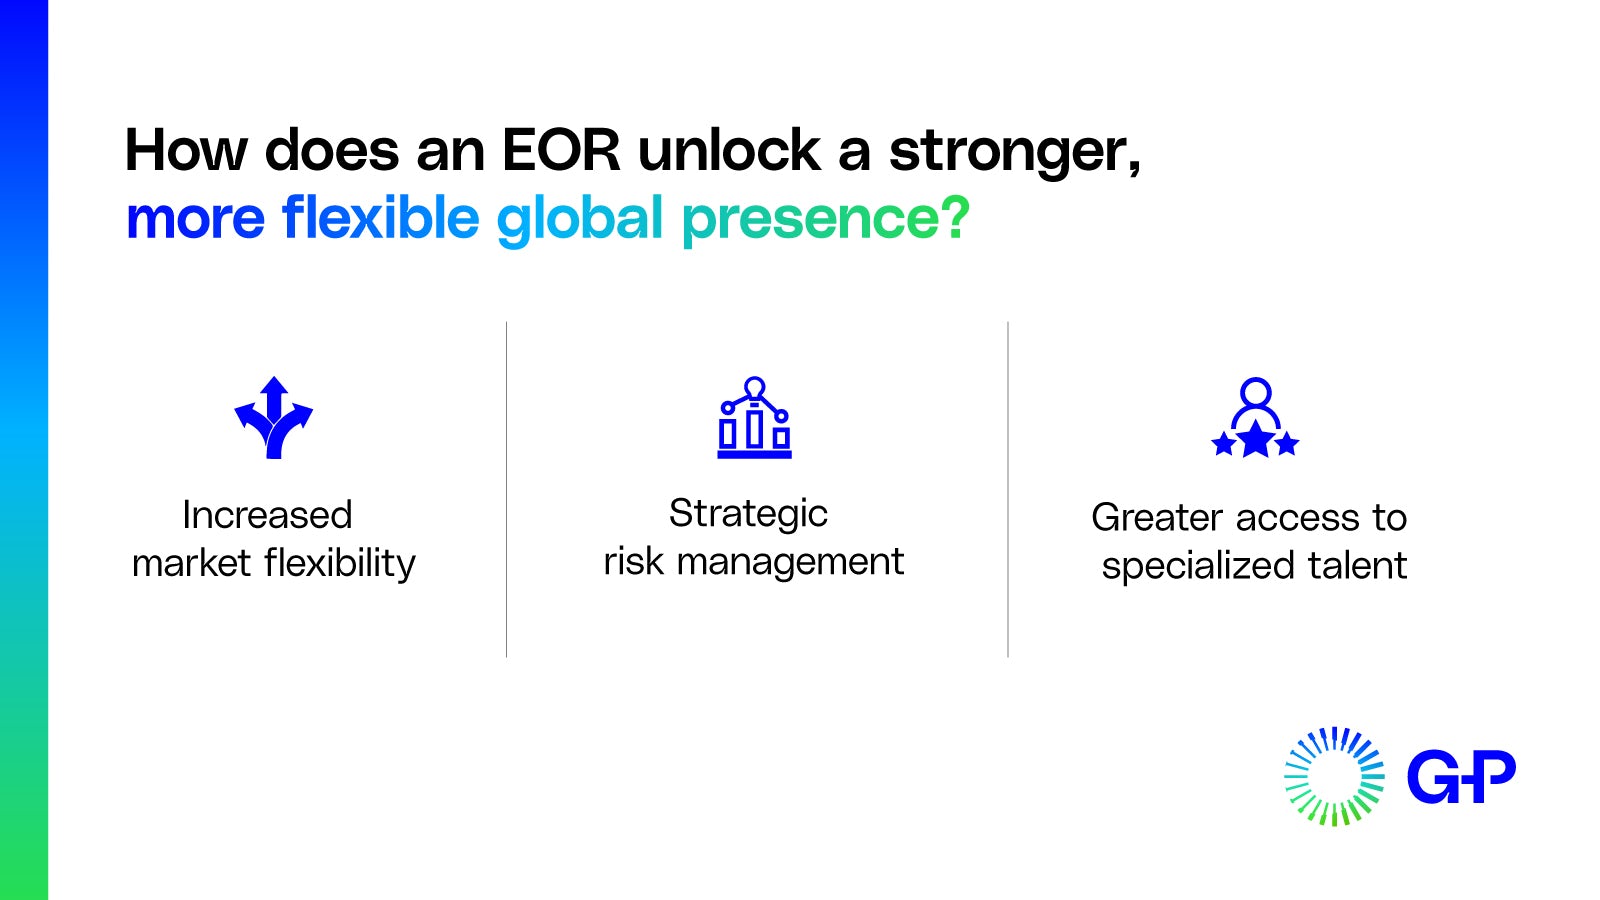 Infographic with 3 key benefits of an EOR